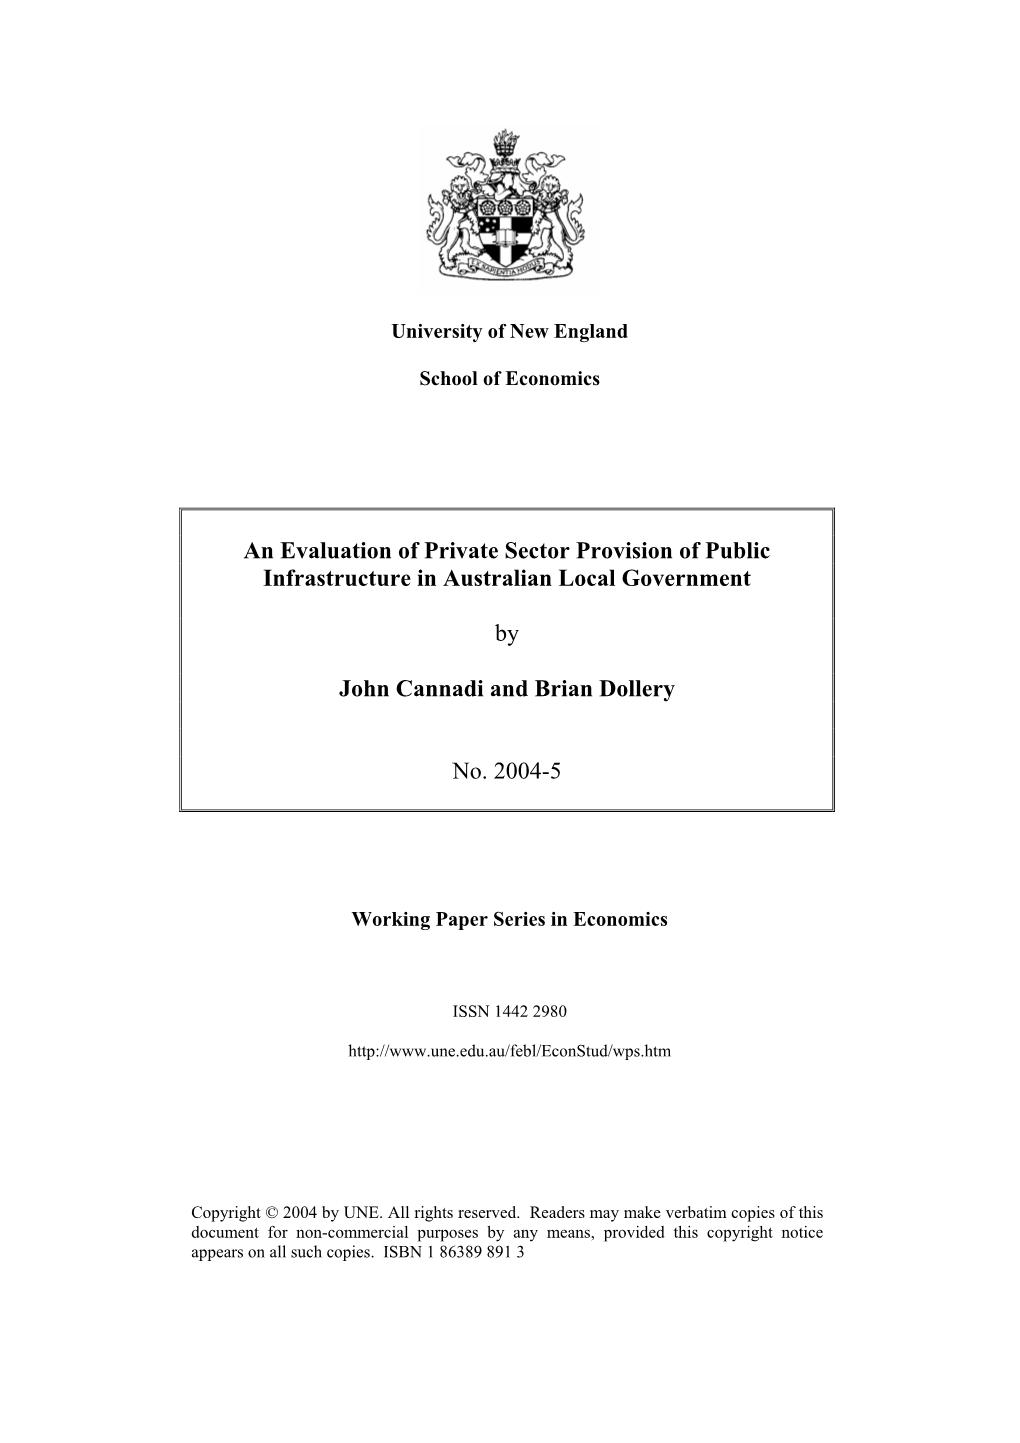 An Evaluation of Private Sector Provision of Public Infrastructure in Australian Local Government